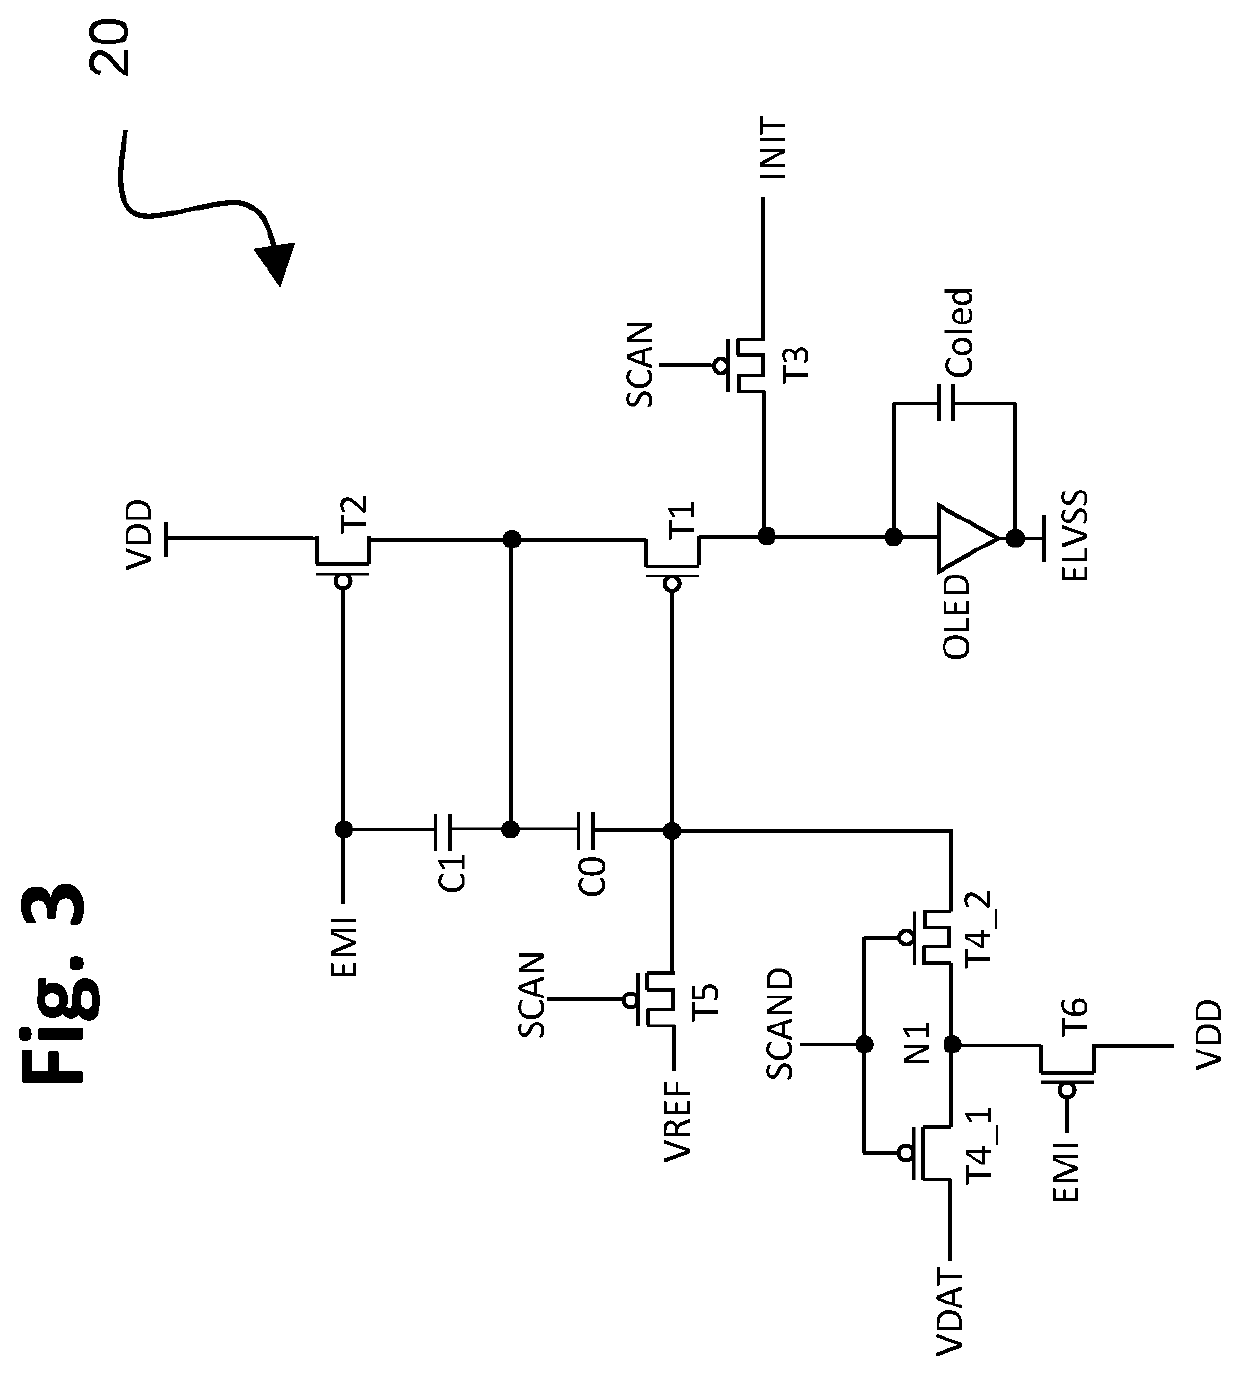 TFT pixel threshold voltage compensation circuit with short data programming time